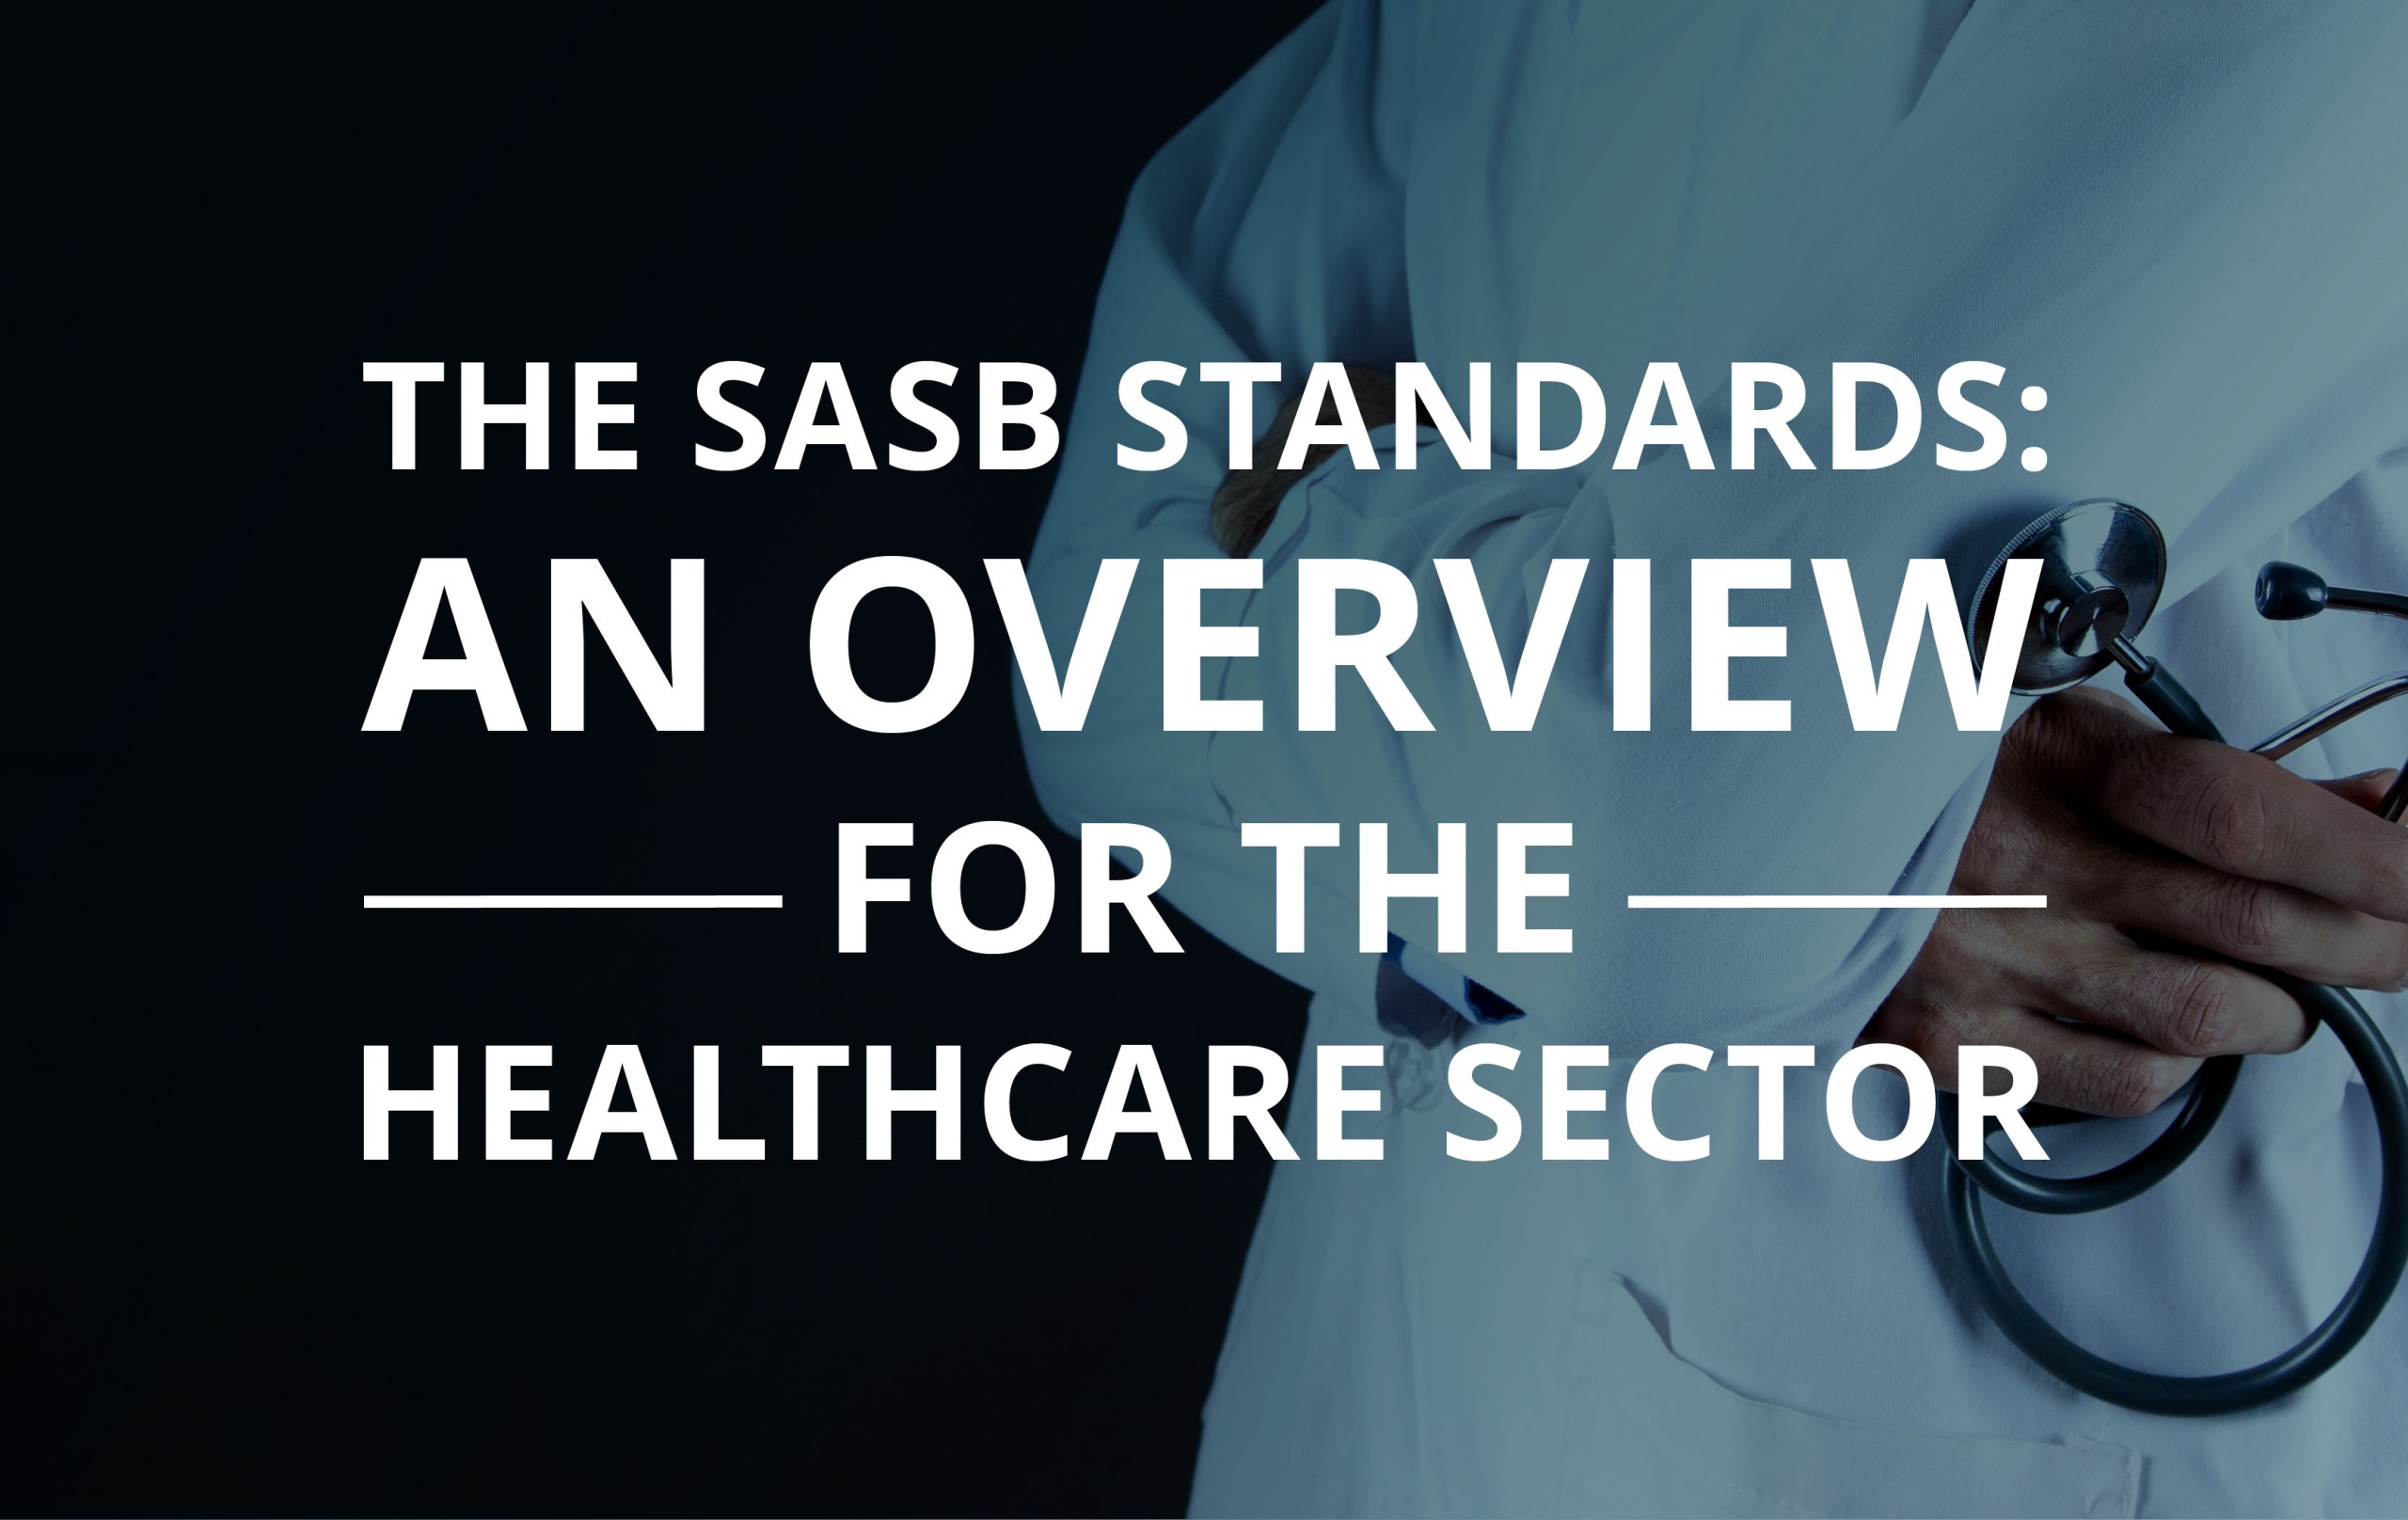 image for The SASB Standards: An Overview for the Healthcare Sector